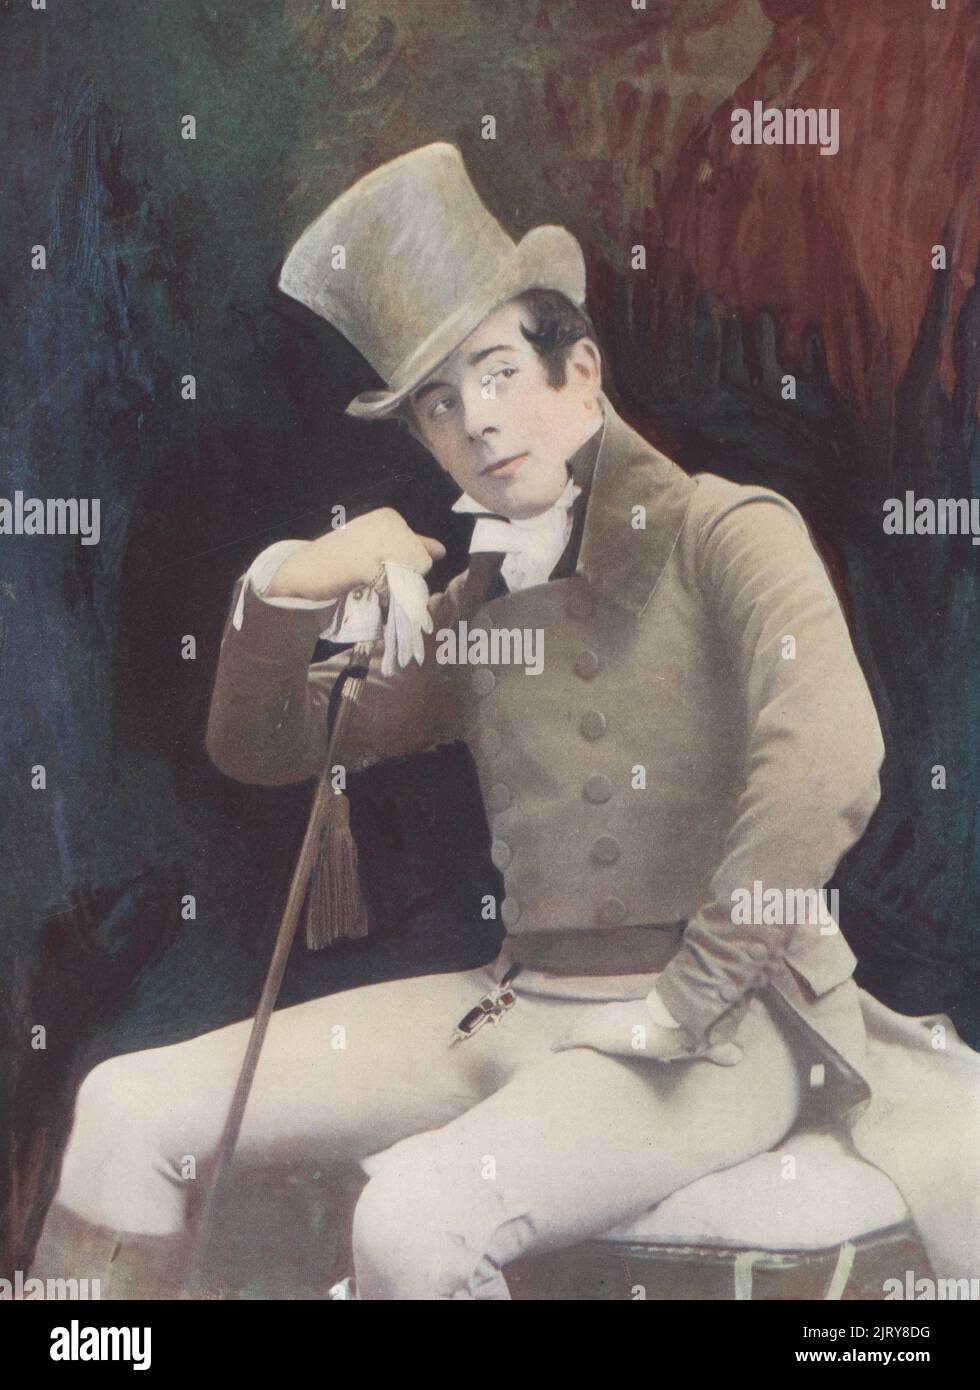 Seymour Hicks as Valentine Brown in Quality Street, a popular musical comedy by J.M. Barrie, Vaudeville Theatre, 1902. SIr Edward Seymour Hicks, English actor, music hall performer, manager, 1871-1949. Photograph by Alfred Ellis and Walery (Stanislaw Julian Ignacy). Colour printing of a hand-coloured illustration based on a monochrome photograph from George Newnes’s Players of the Day, London, 1905. Stock Photo